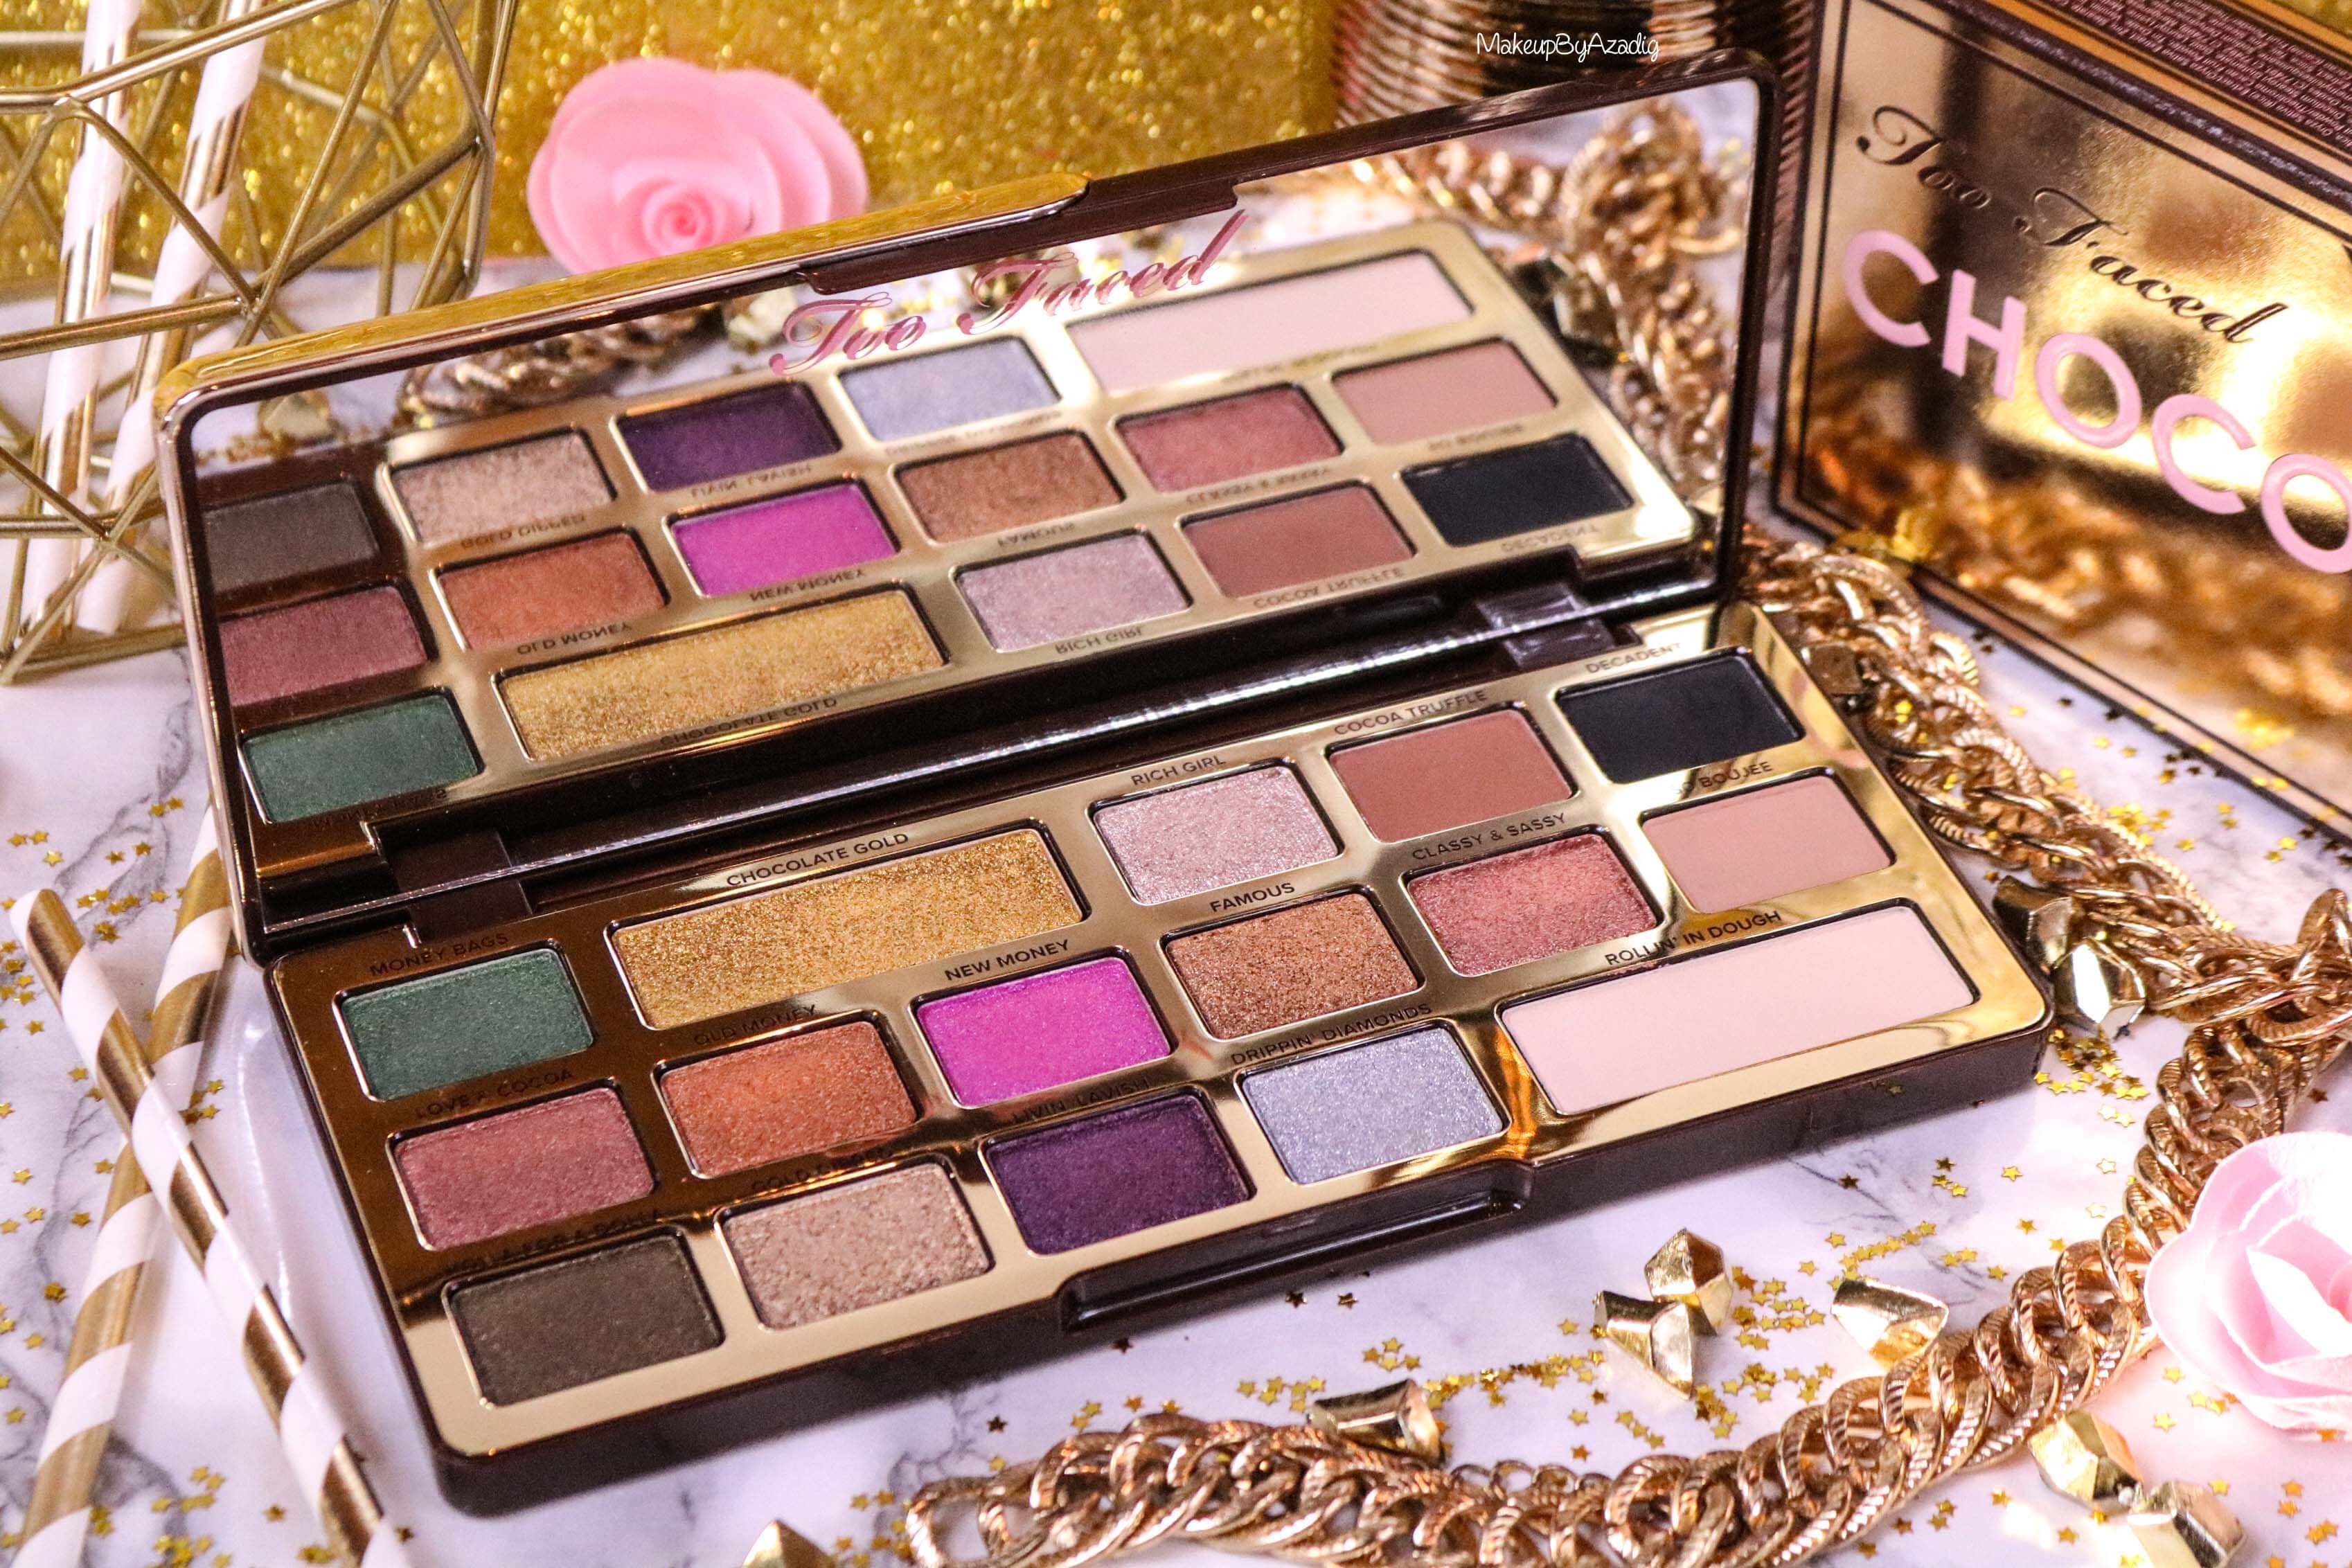 revue-palette-too-faced-chocolate-gold-review-swatch-swatches-avis-prix-makeupbyazadig-influencer-beautiful